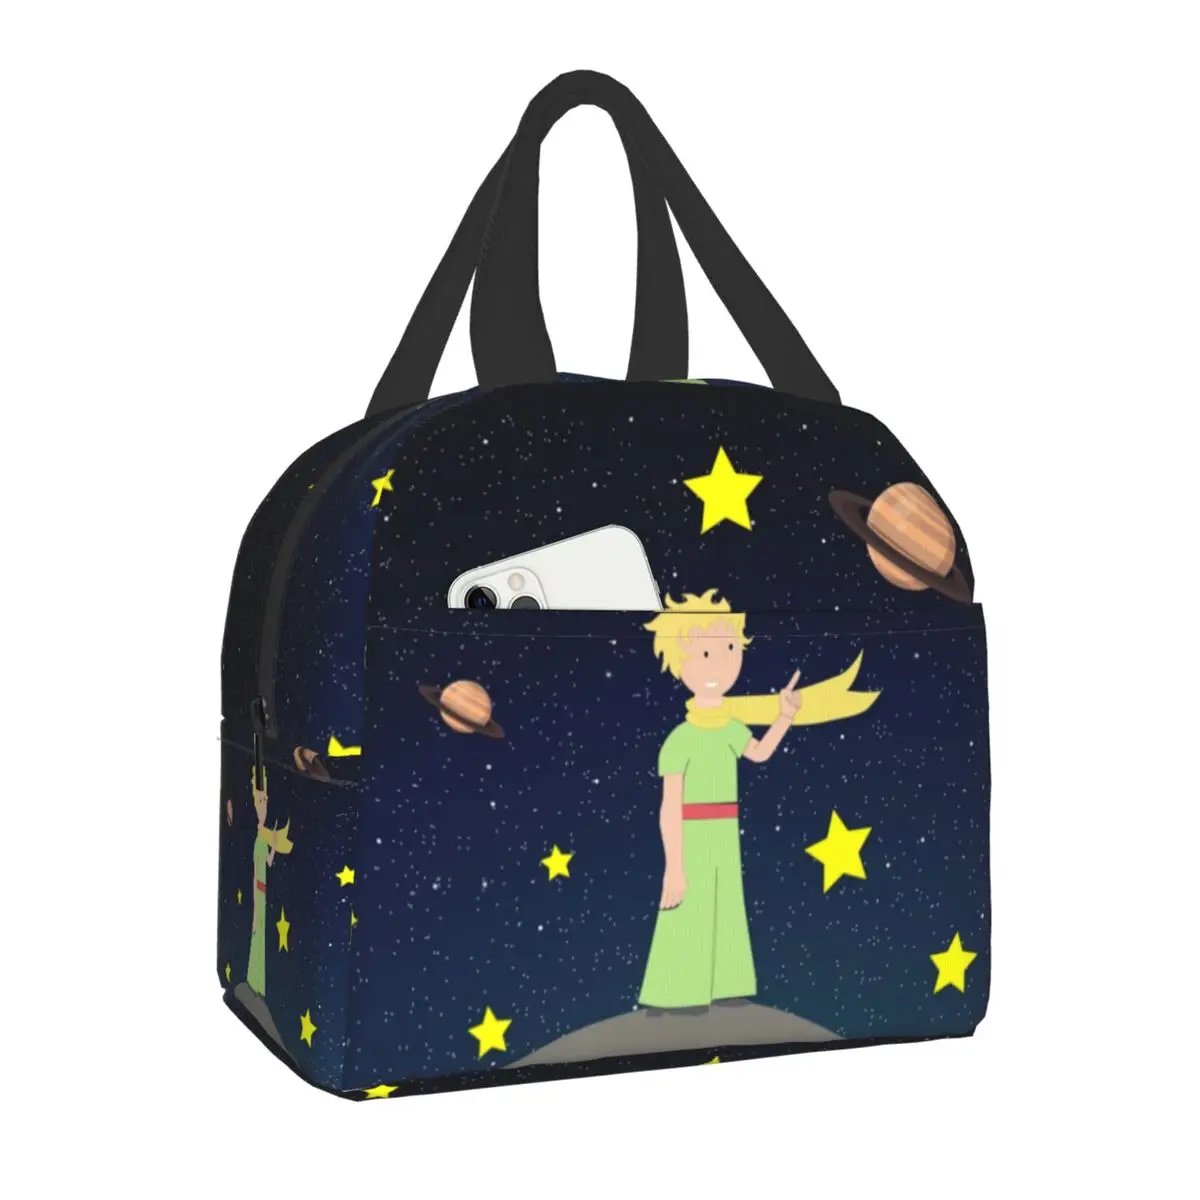 Fairy Tale Fiction The Little Prince Lunch Bag Warm Cooler Insulated Lunch Box for Women Kids School Picnic Food Portable Bags